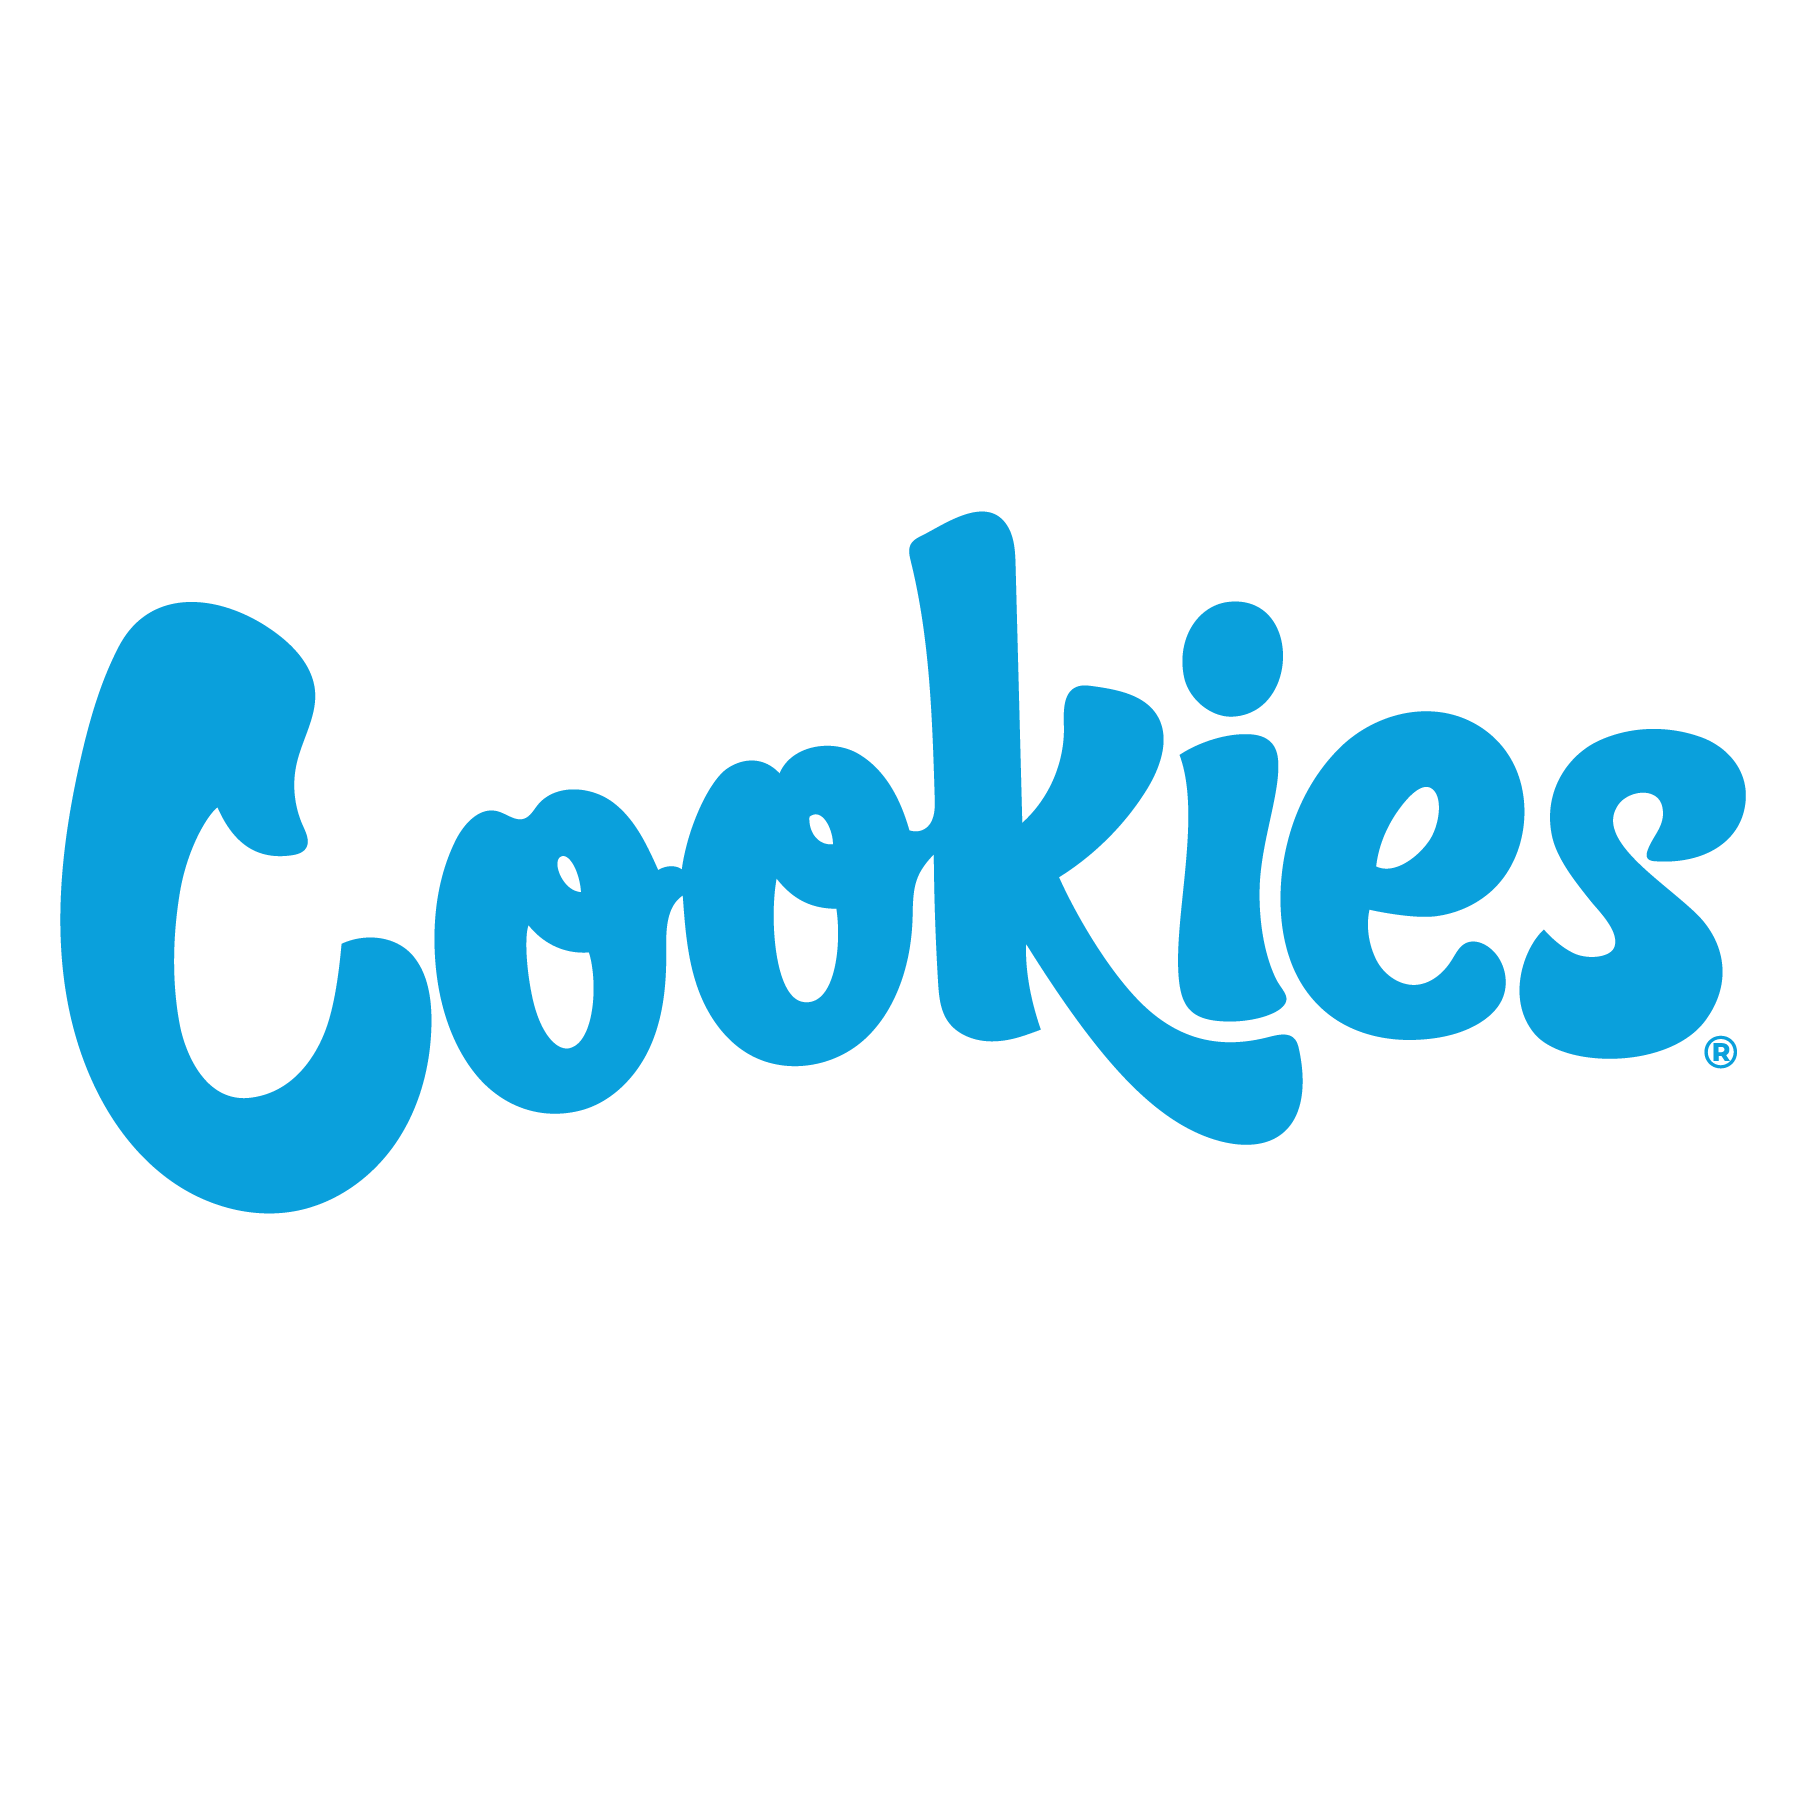 COOKIES, A CANNABIS BRAND OPENS IN DENVER!